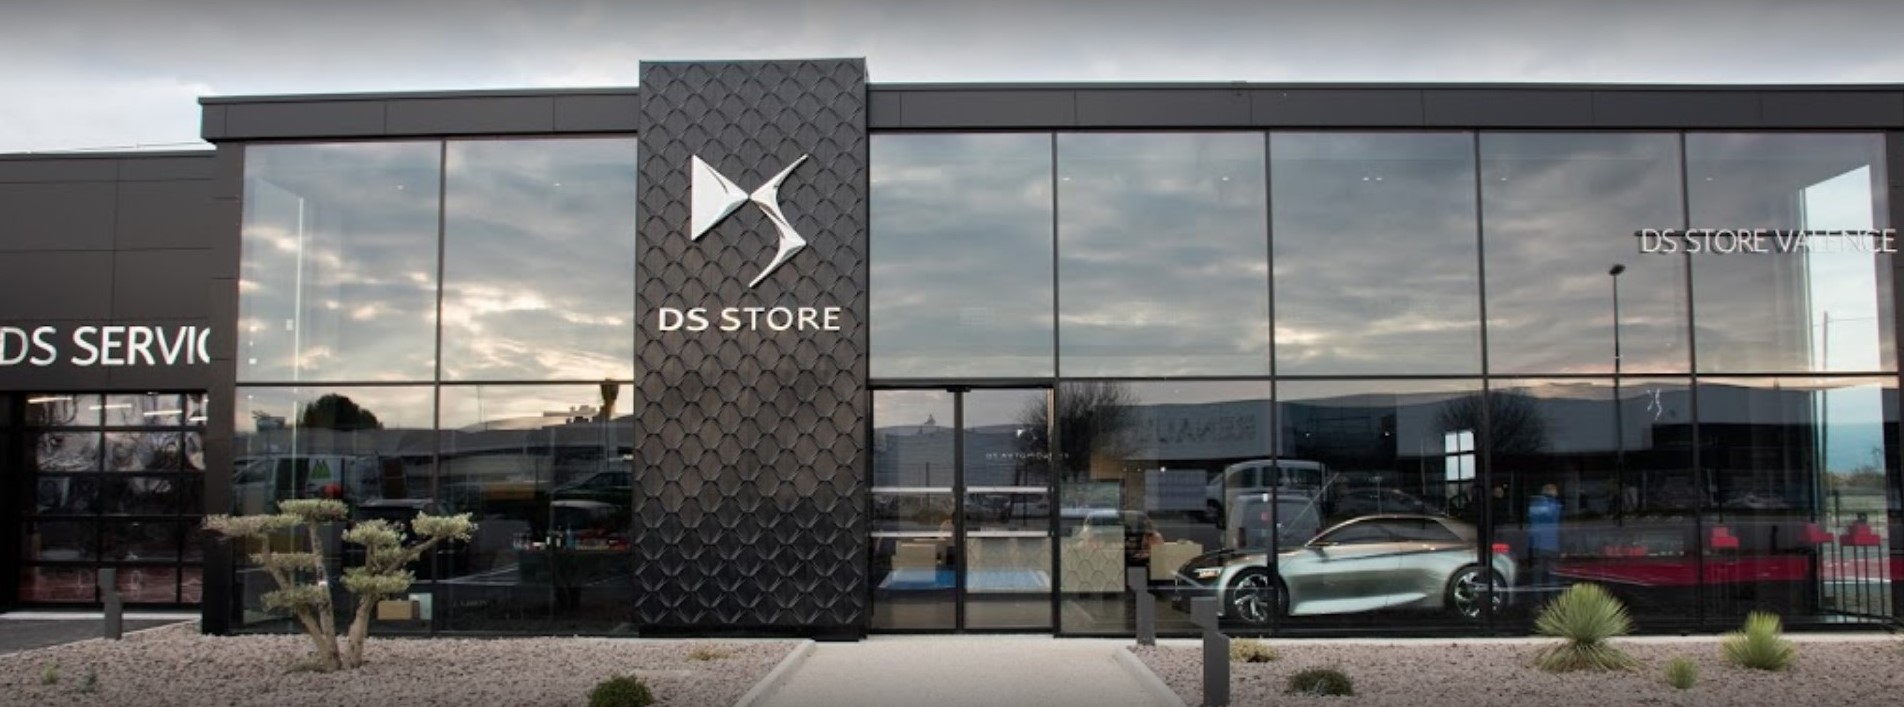 DS STORE VALENCE